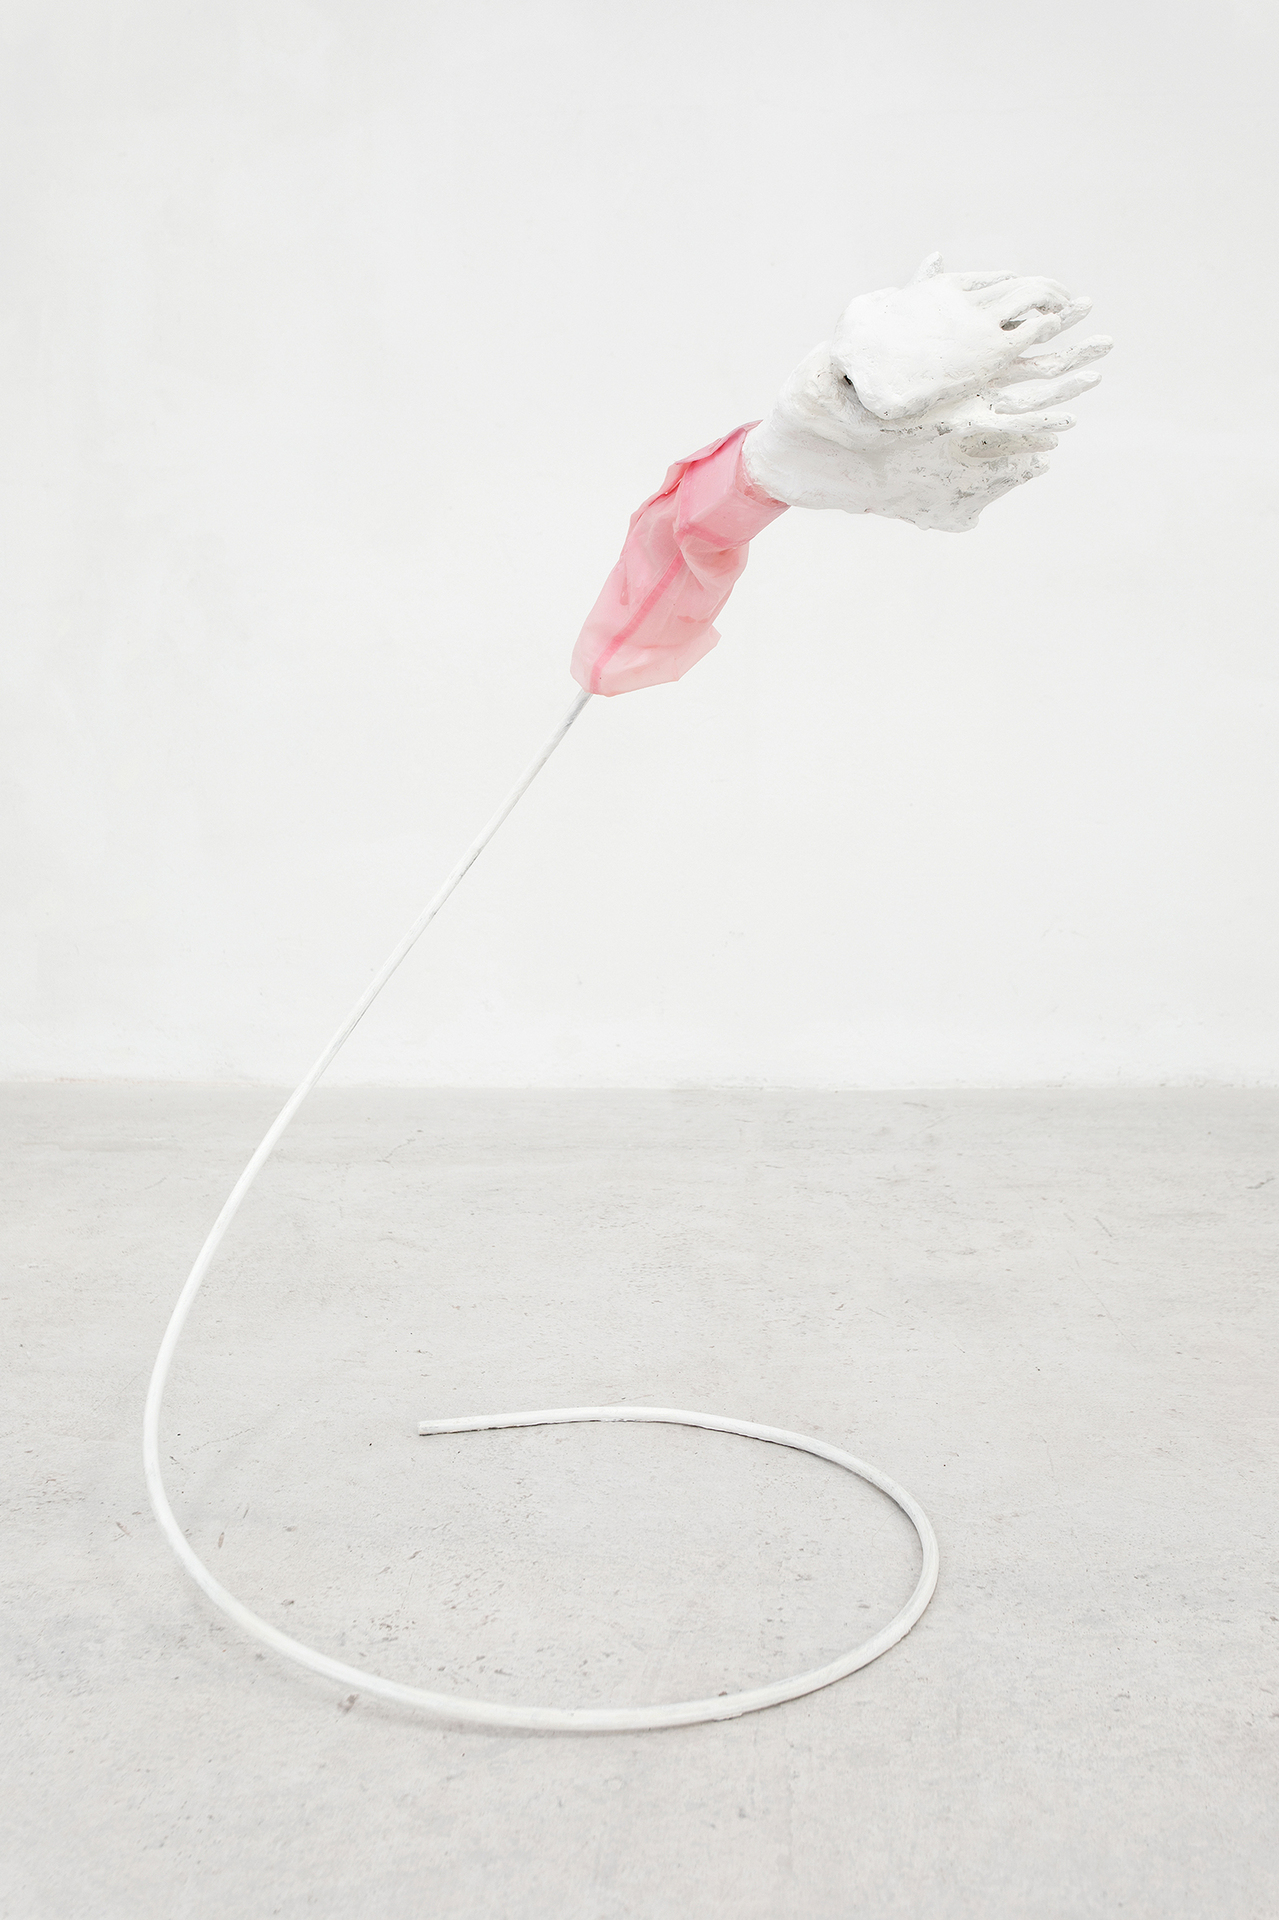 Hannah Fitz. You have harnessed yourself ridiculously to this world, 2020. Steel, Card, Wire, Plaster Bandage, Plaster Filler, Resin, Paint, Clothing. 85 x 60 x 55 cm